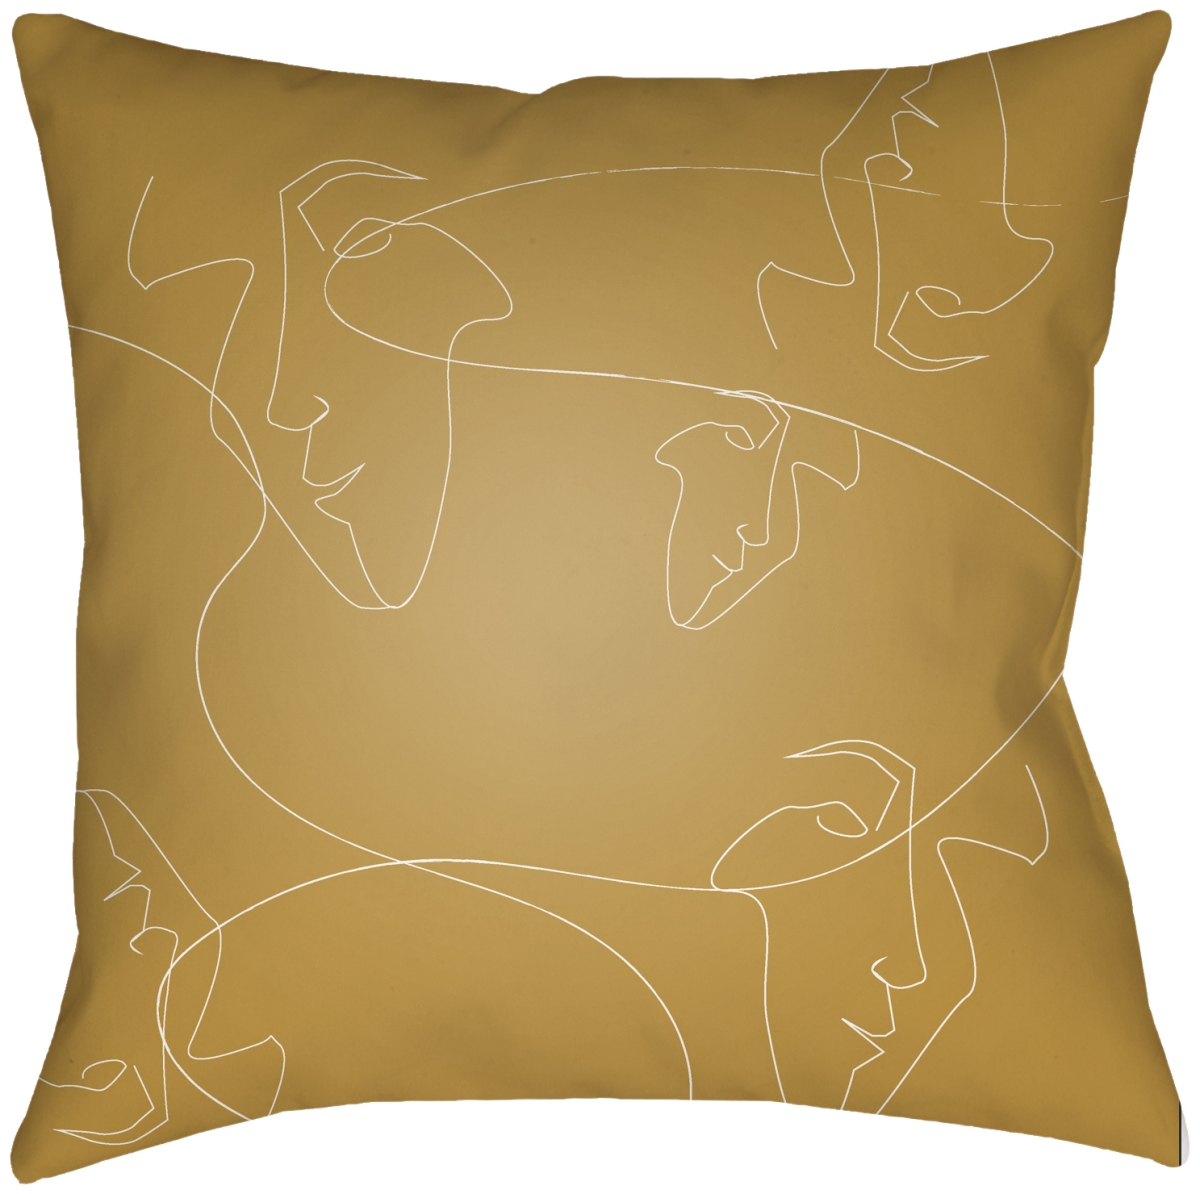 MDF001-1616 16 x 16 in. Modern Faces Accent Square Pillow, Mustard & White -  Surya